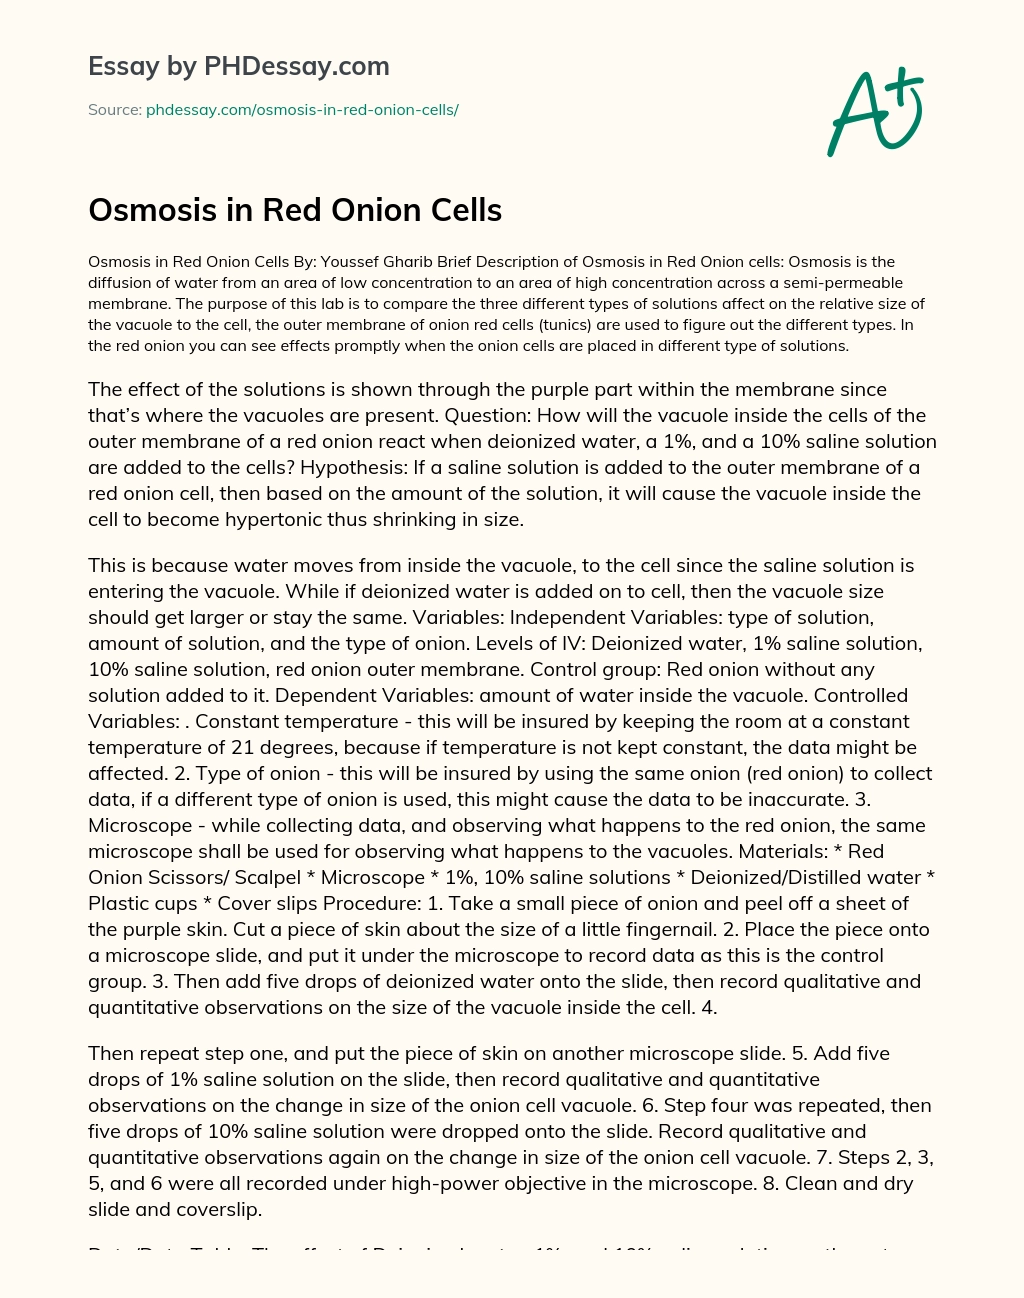 Osmosis in Red Onion Cells essay